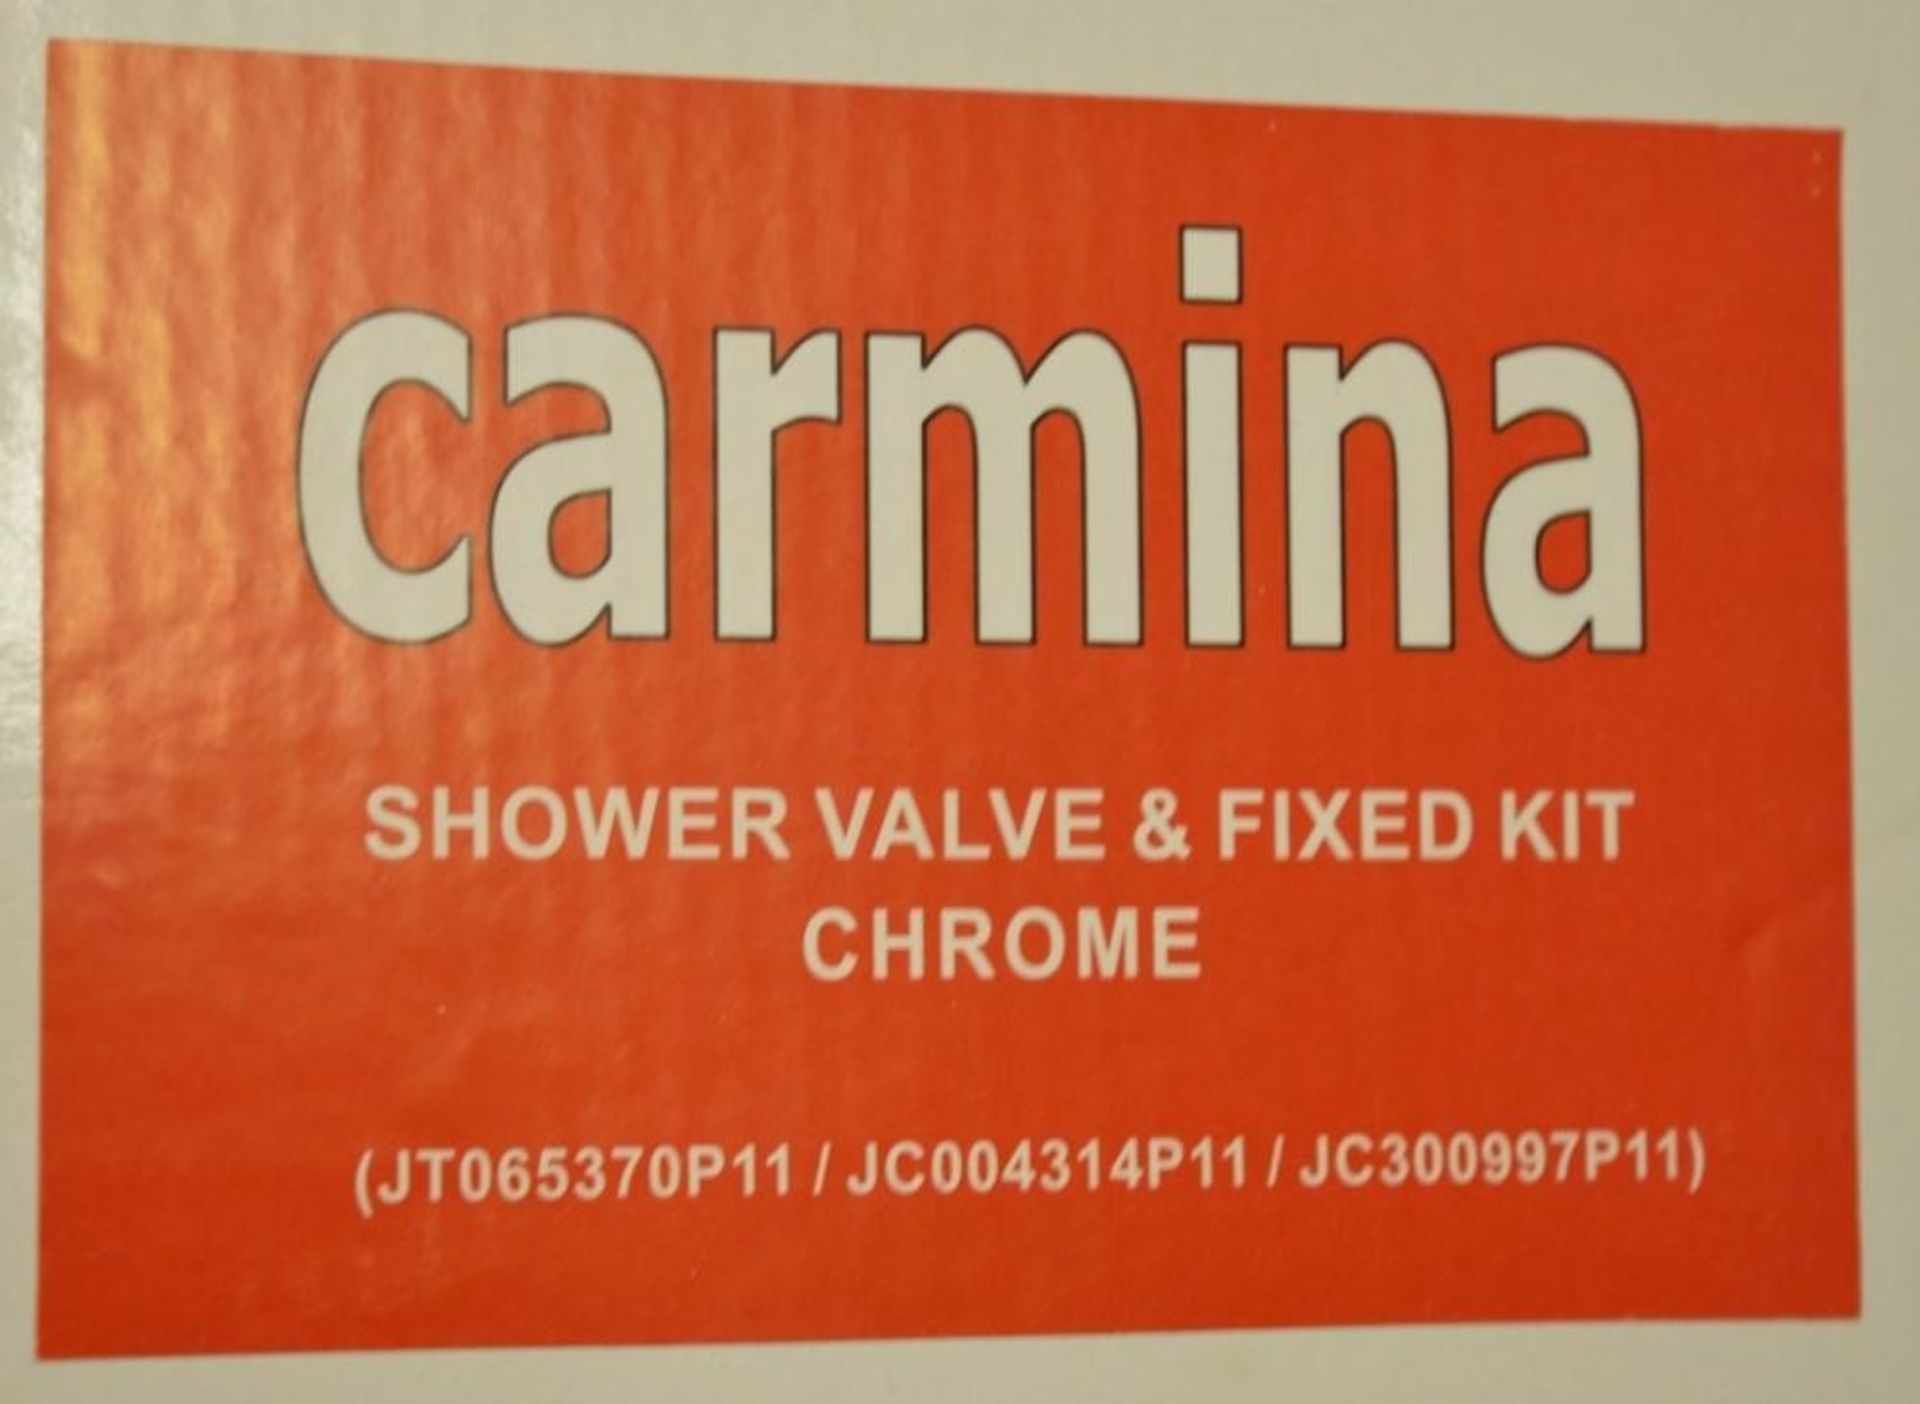 5 x Carmina Shower Valve Kit - Contains Chrome Shower Head, Fixed Arm and Manual Control - Image 12 of 13